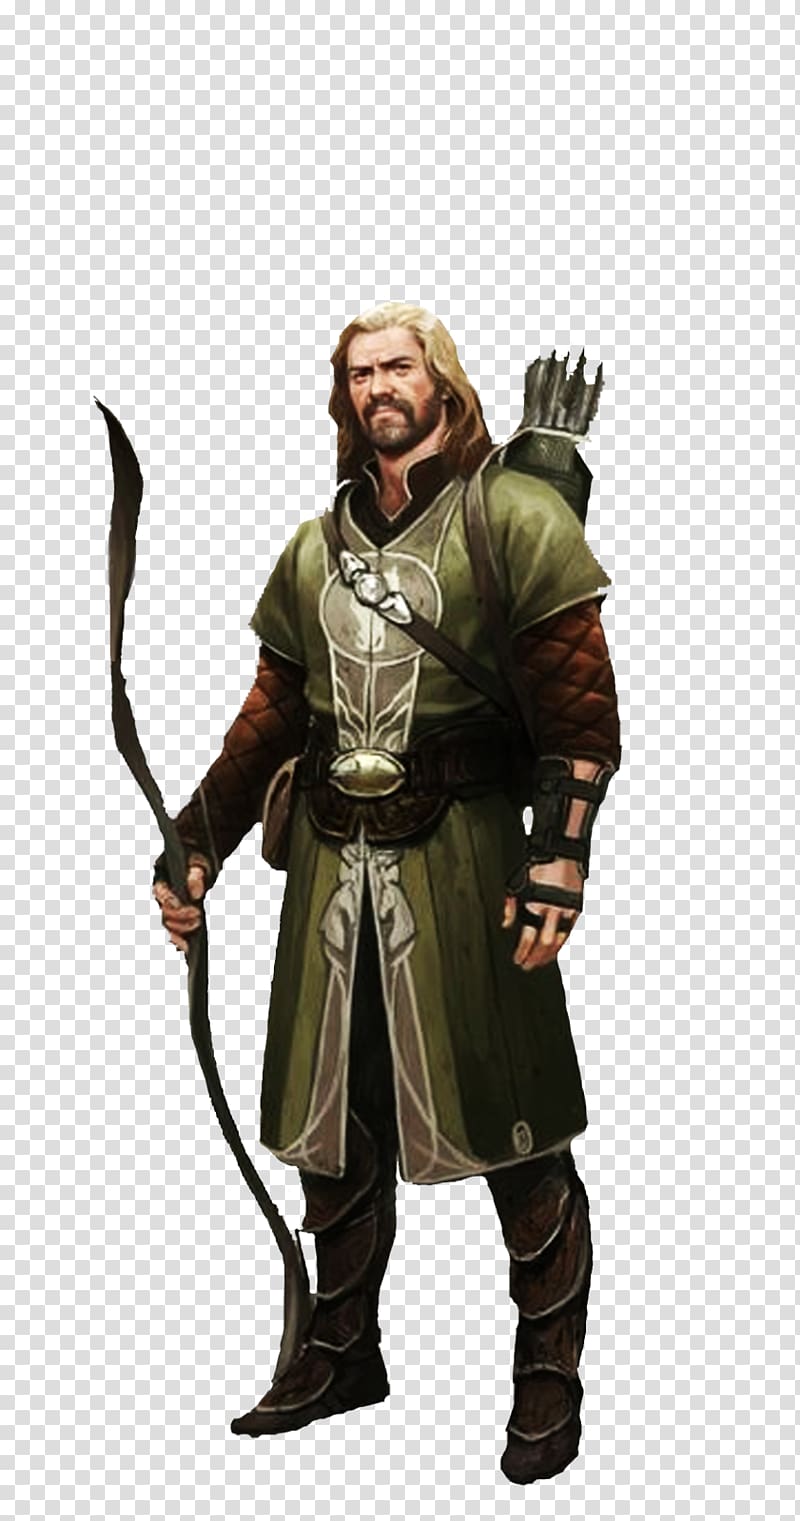 Dungeons & Dragons Pathfinder Roleplaying Game Concept art Ranger, fantasy city transparent background PNG clipart